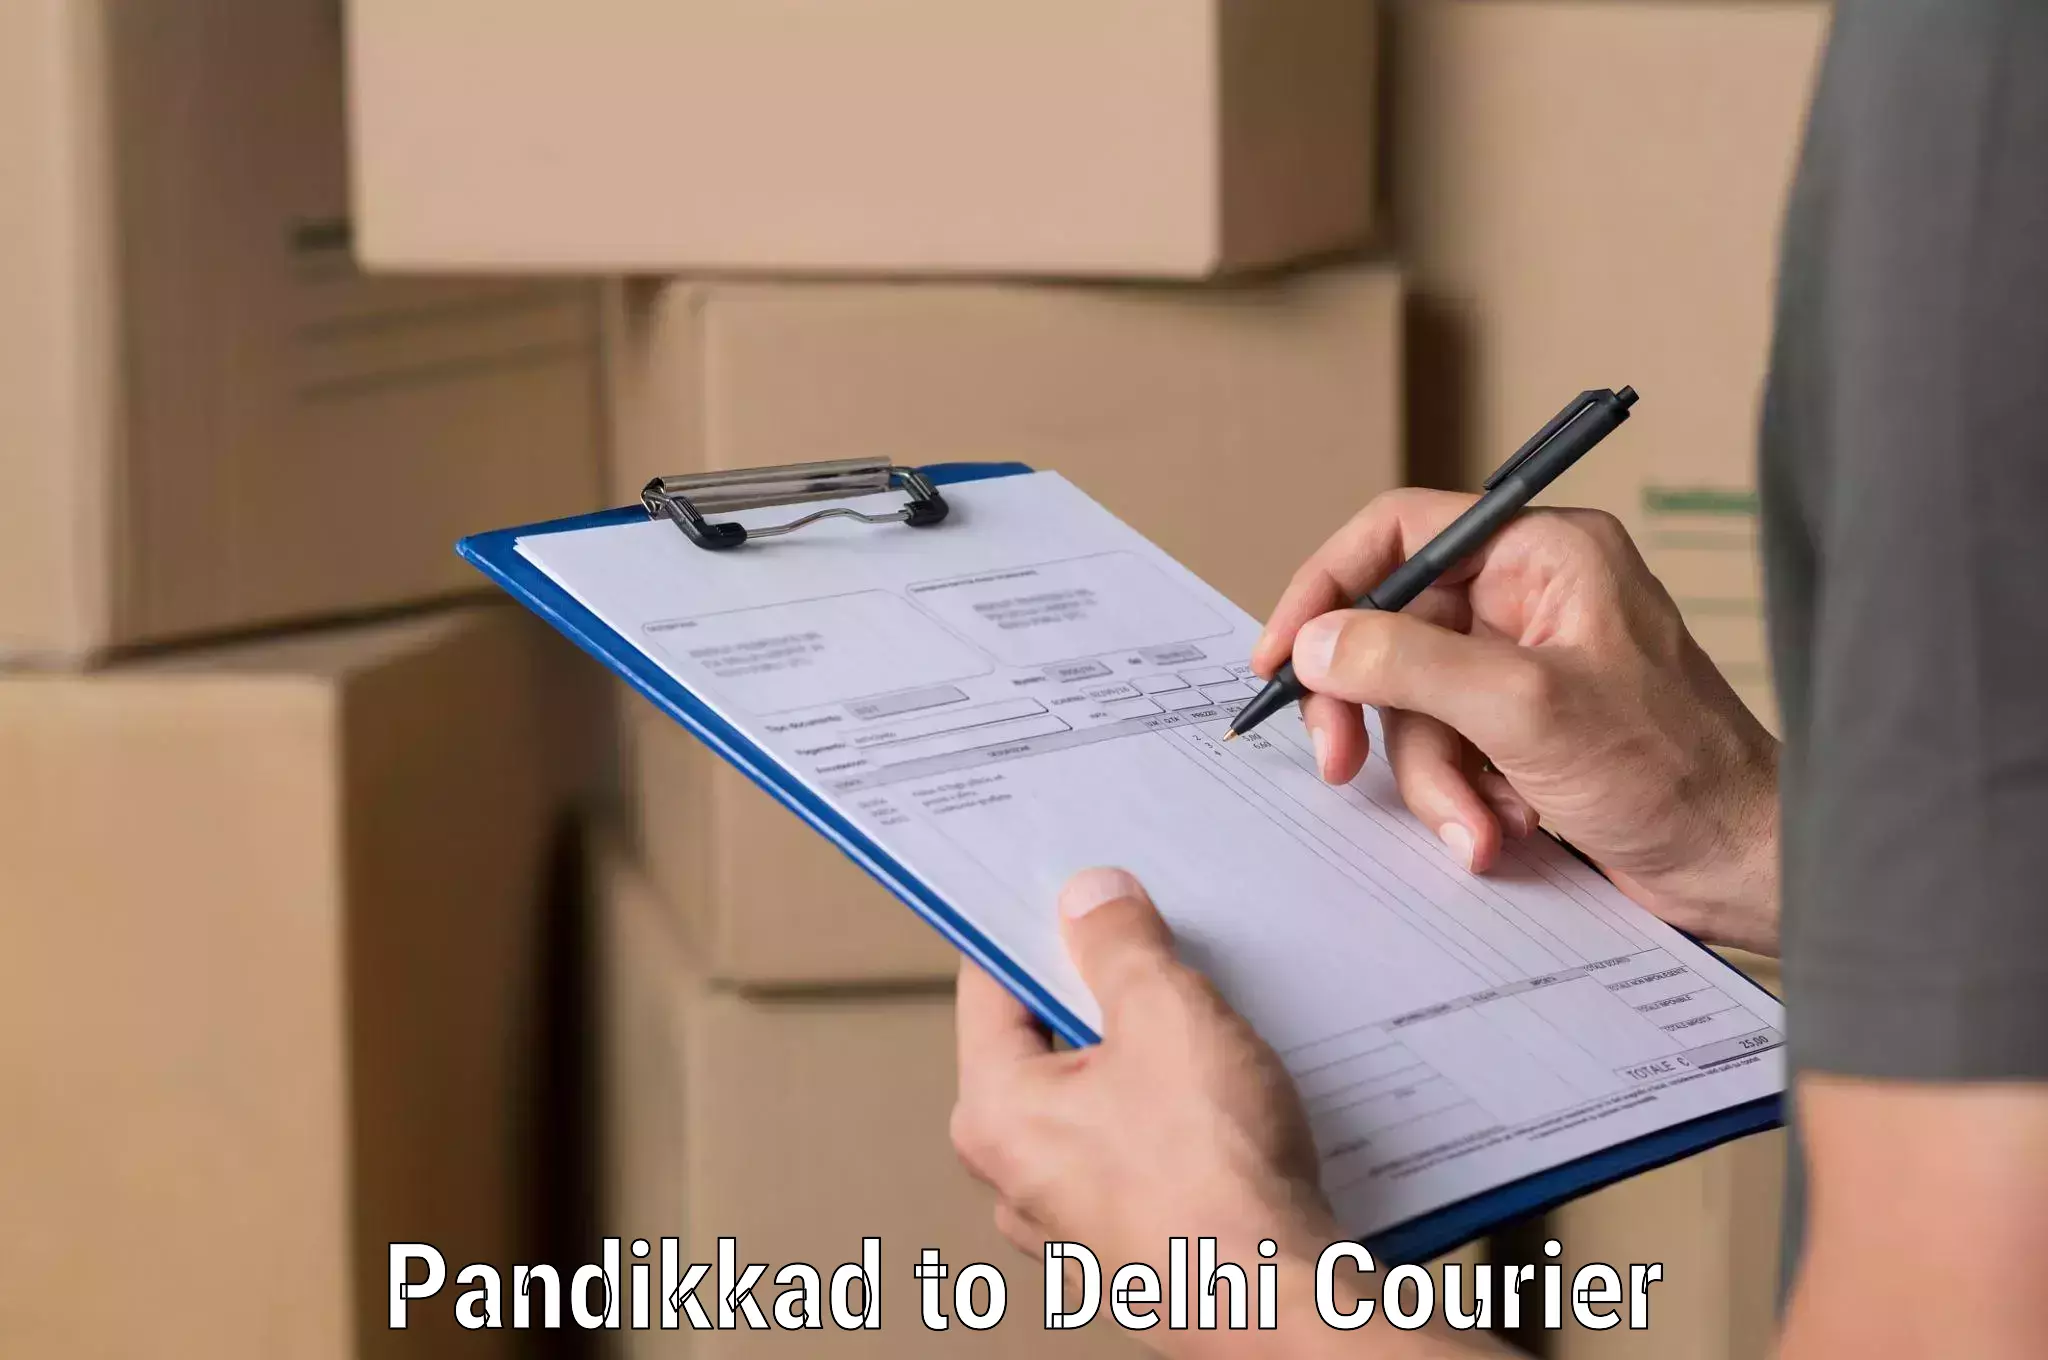 Nationwide shipping services Pandikkad to University of Delhi